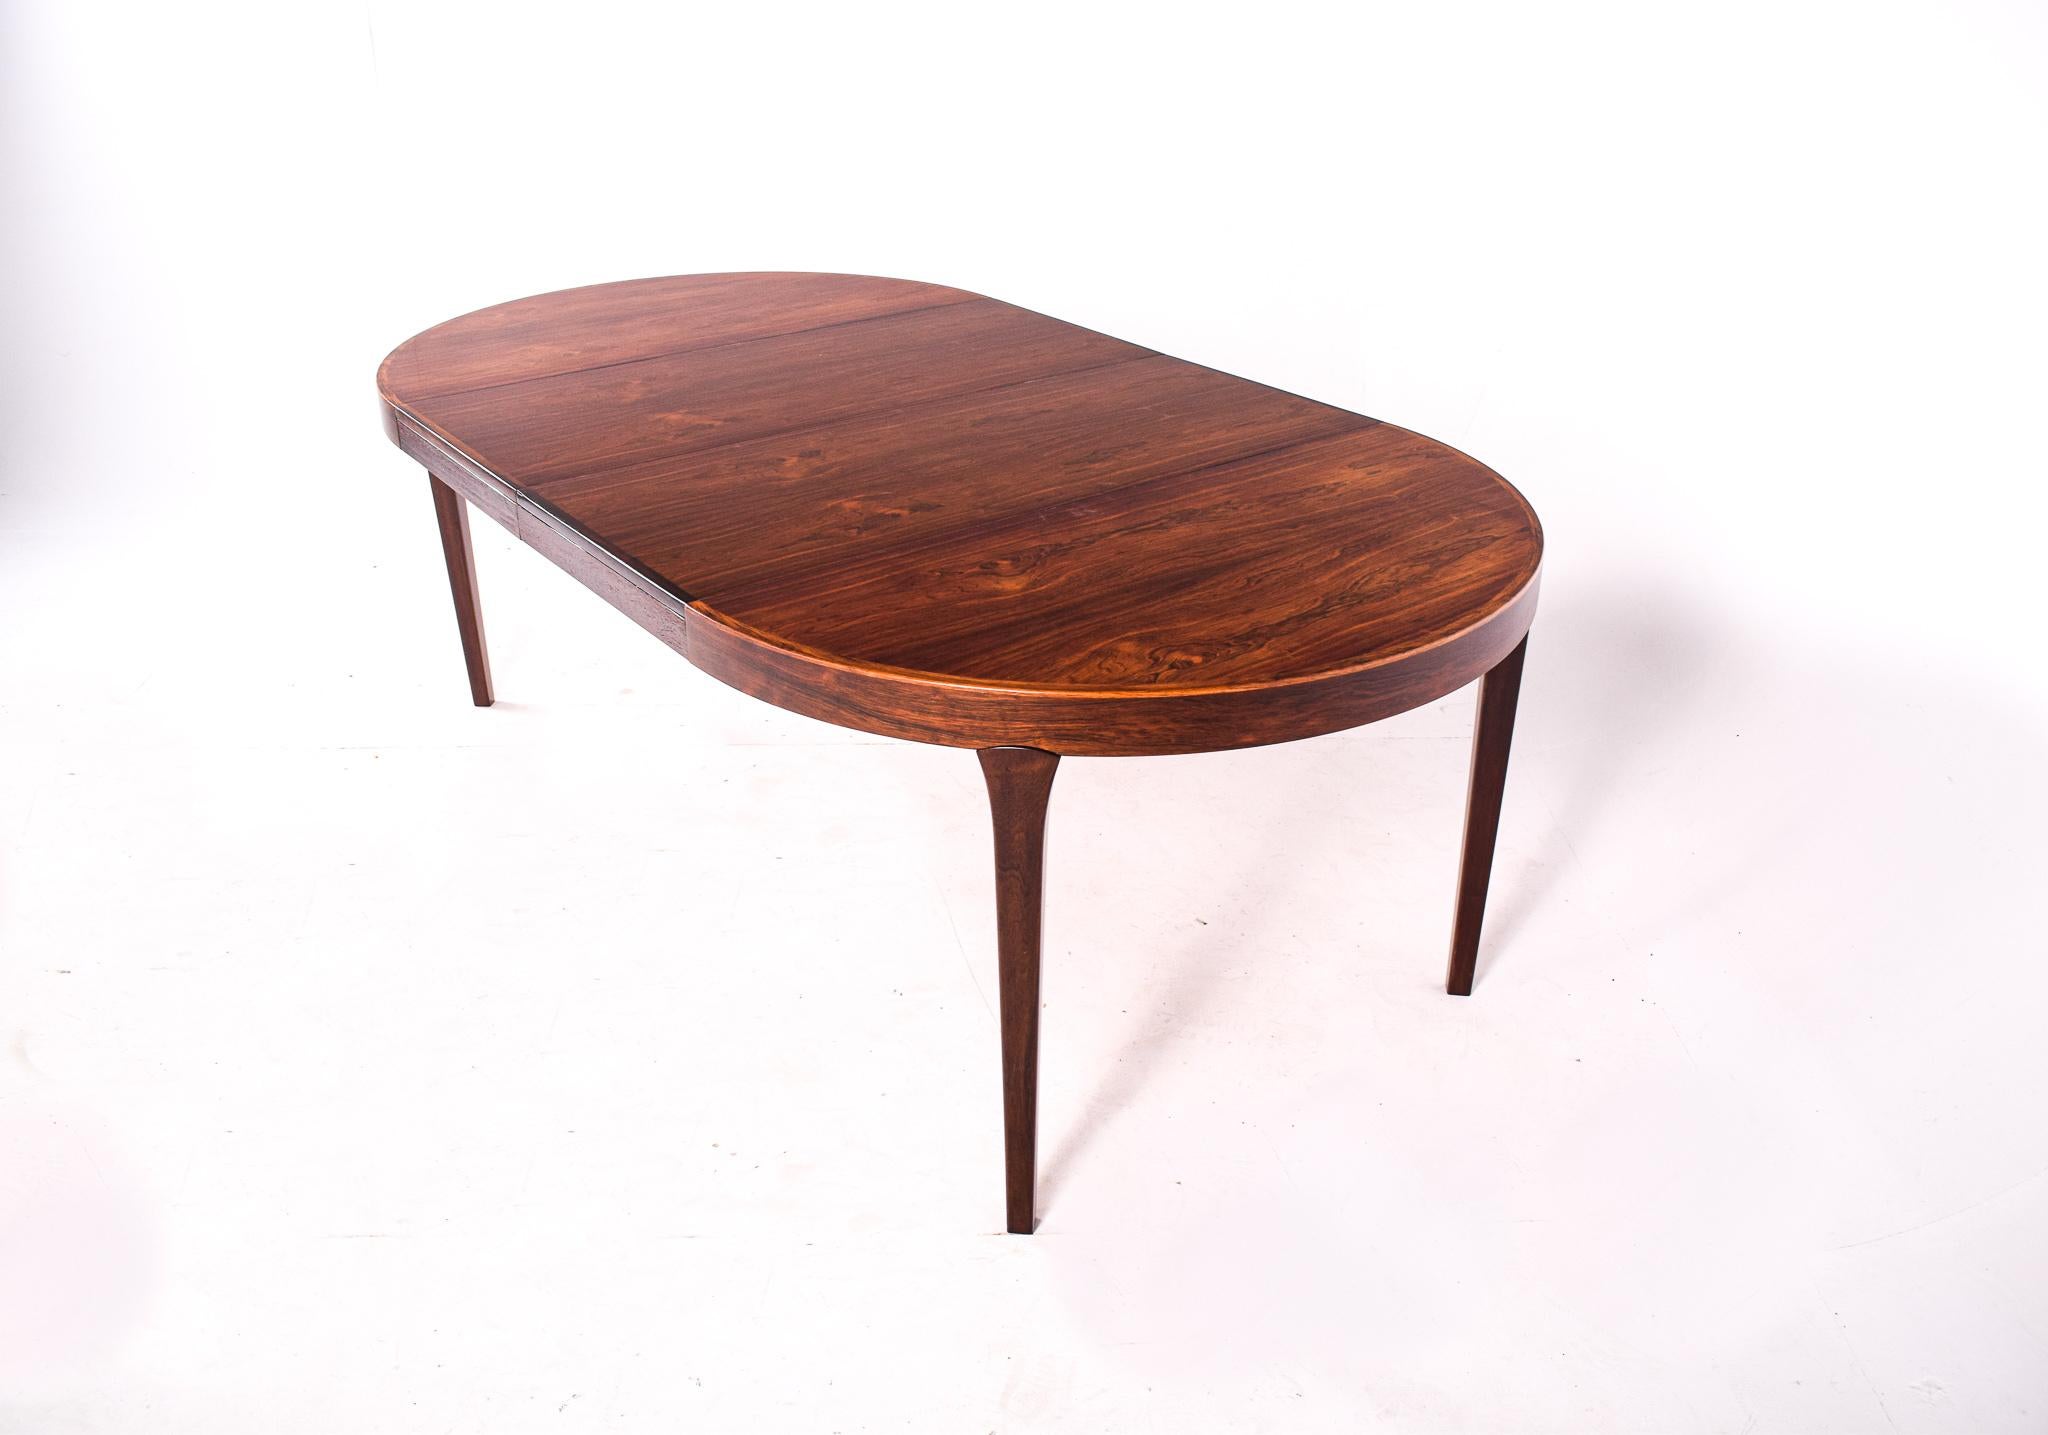 Round dining table, veneered with rosewood. Tapered legs, top with two extension leaves with apron, each 49 cm. This exceptional dining table features beautiful proportions, the weight of the round table top is balanced by the lightness of the